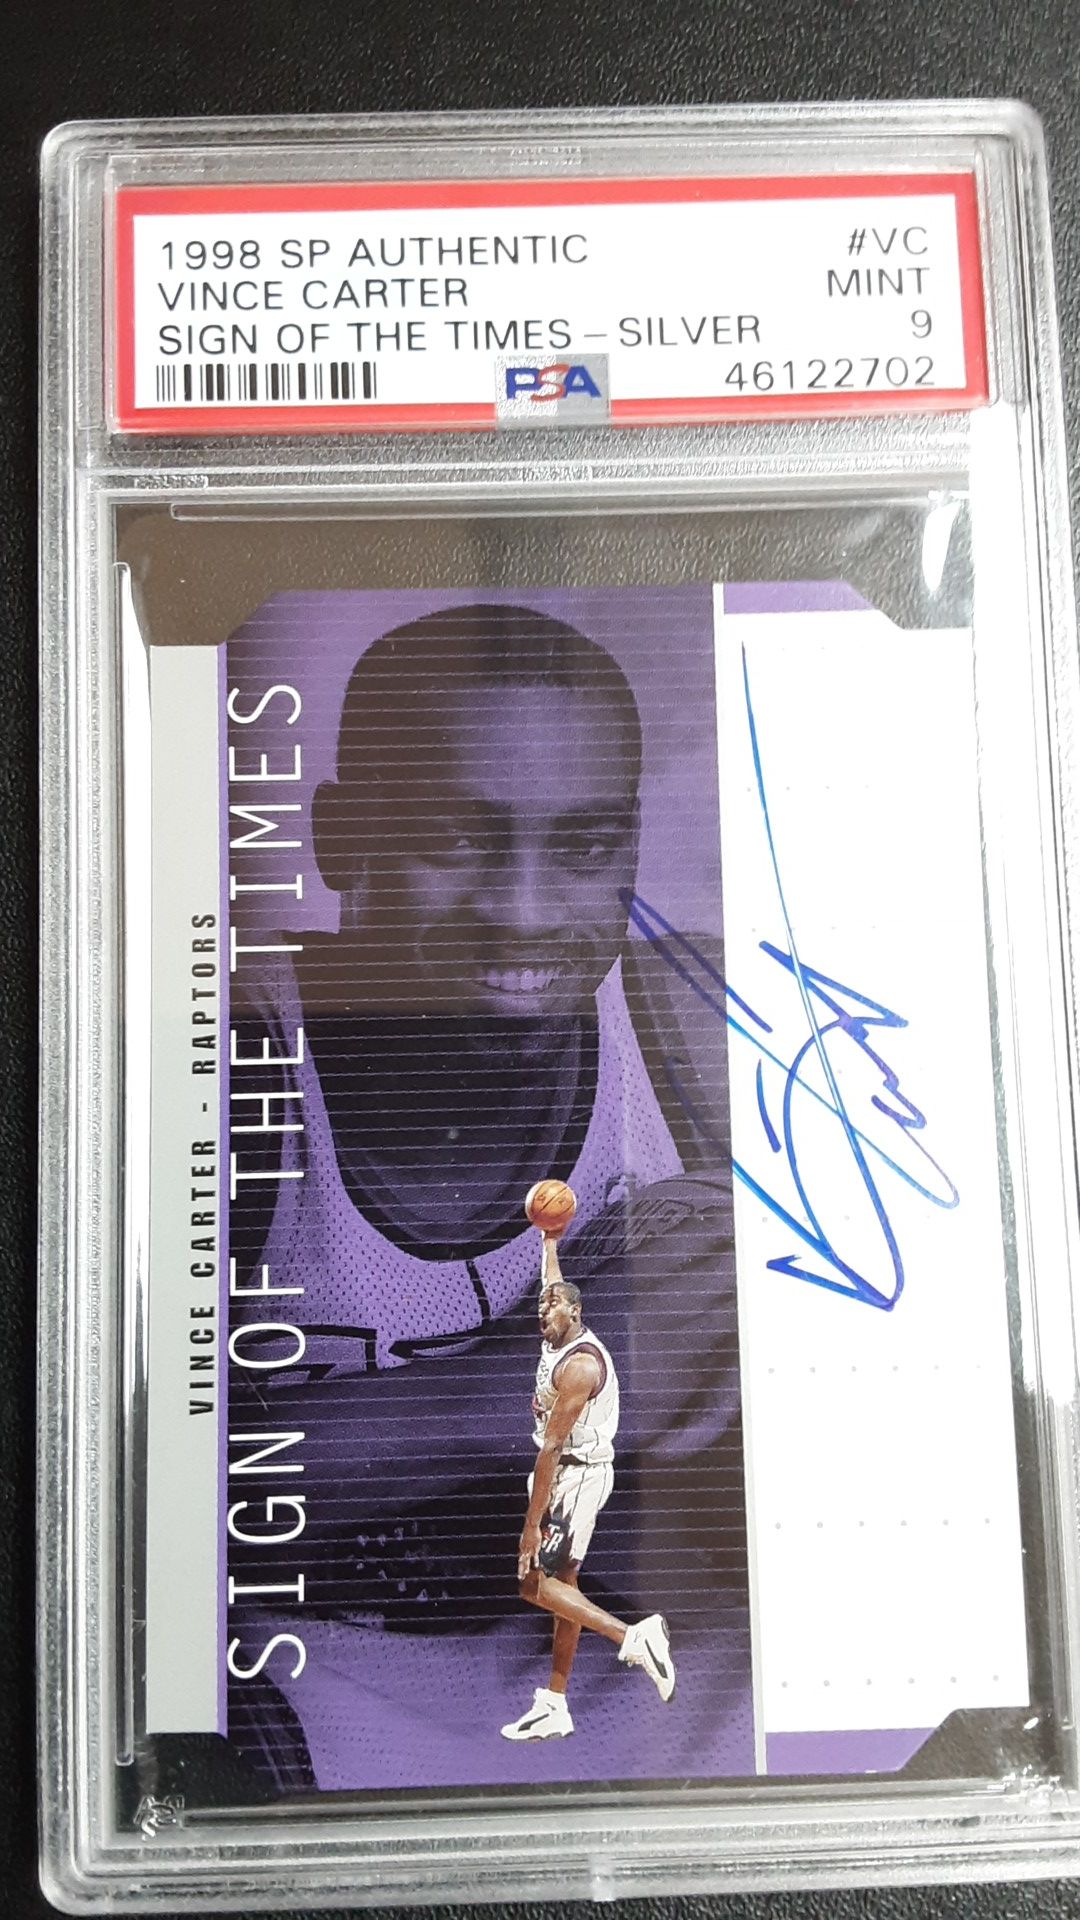 1998 SP authentic Vince Carter sign of The times PSA9